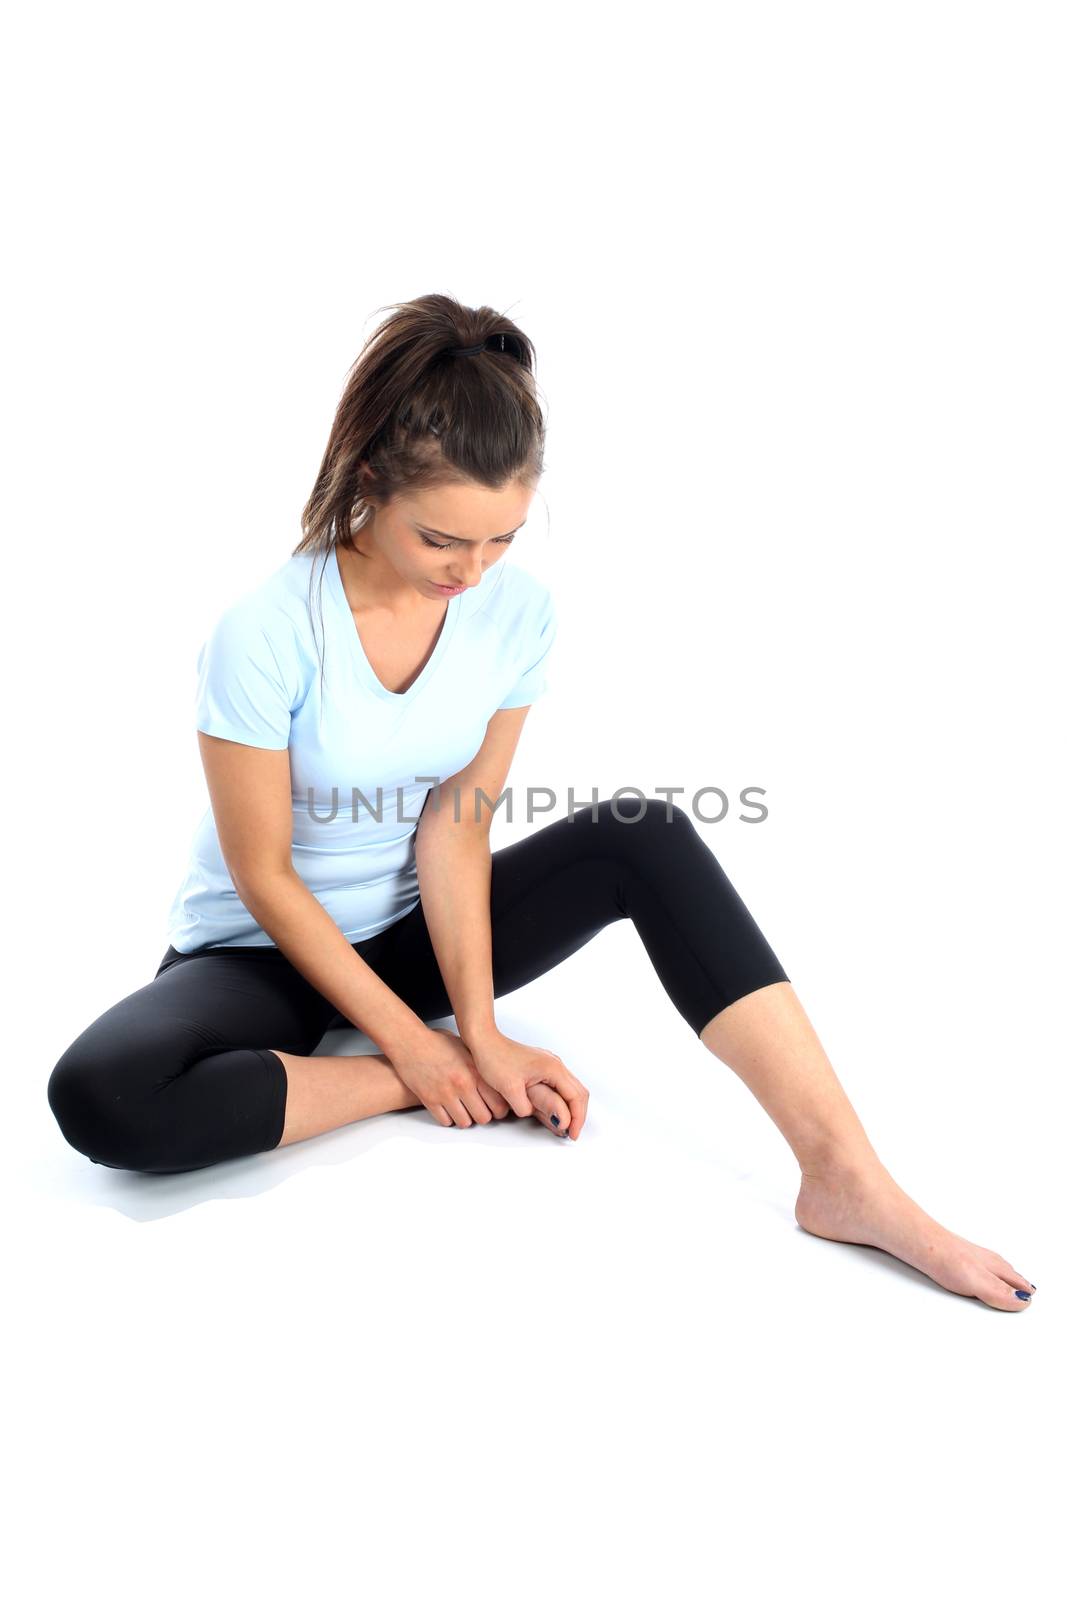 Model Released. Woman With Ankle Sports Injury